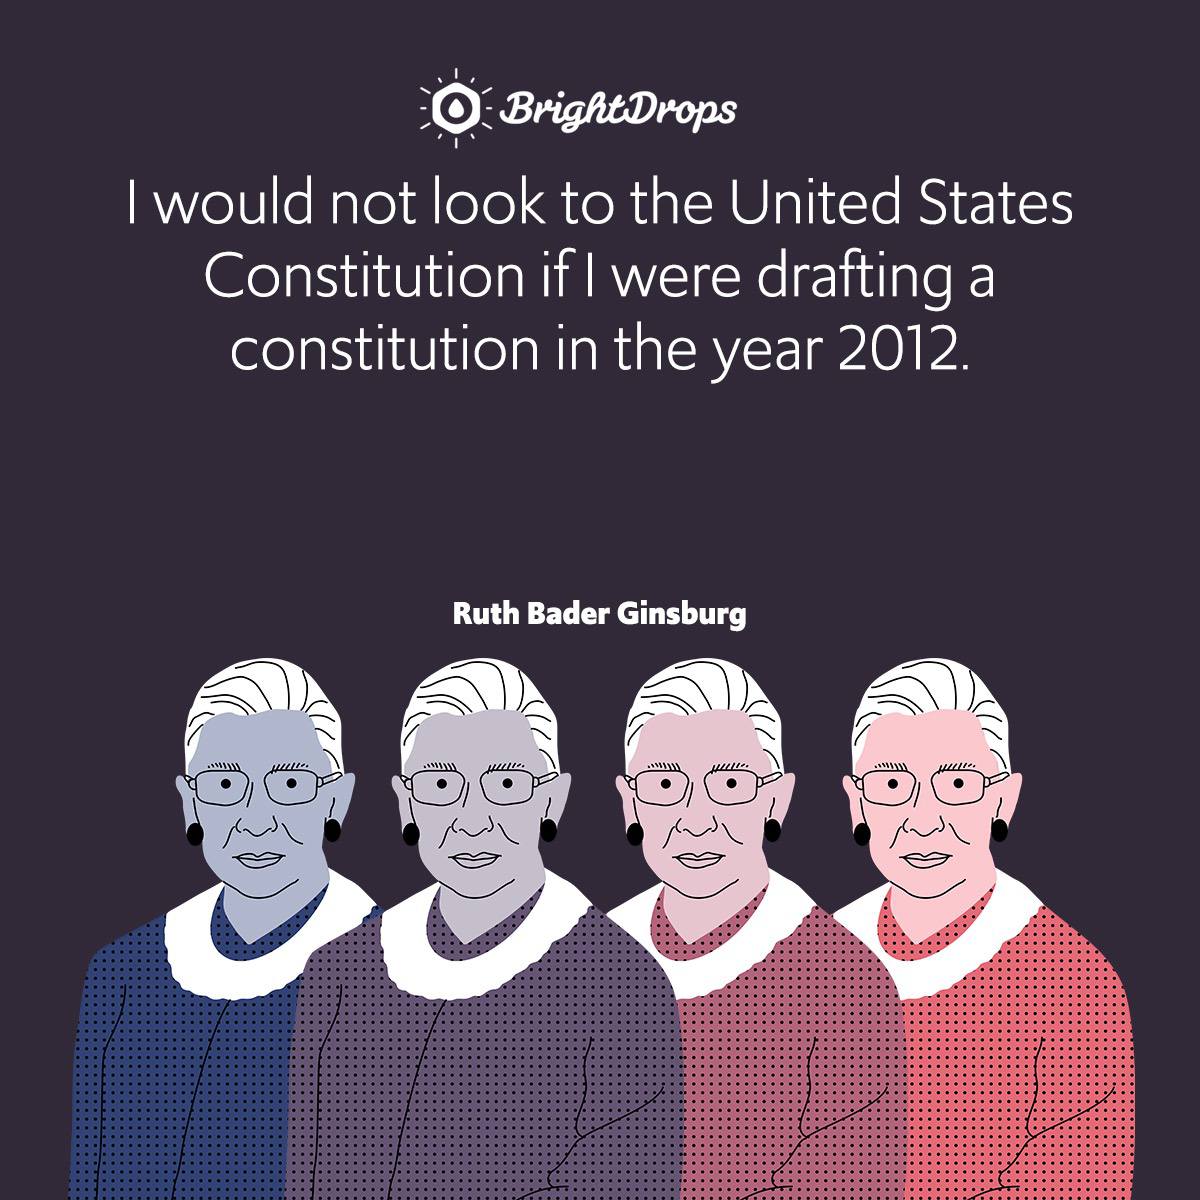 I would not look to the United States Constitution if I were drafting a constitution in the year 2012.